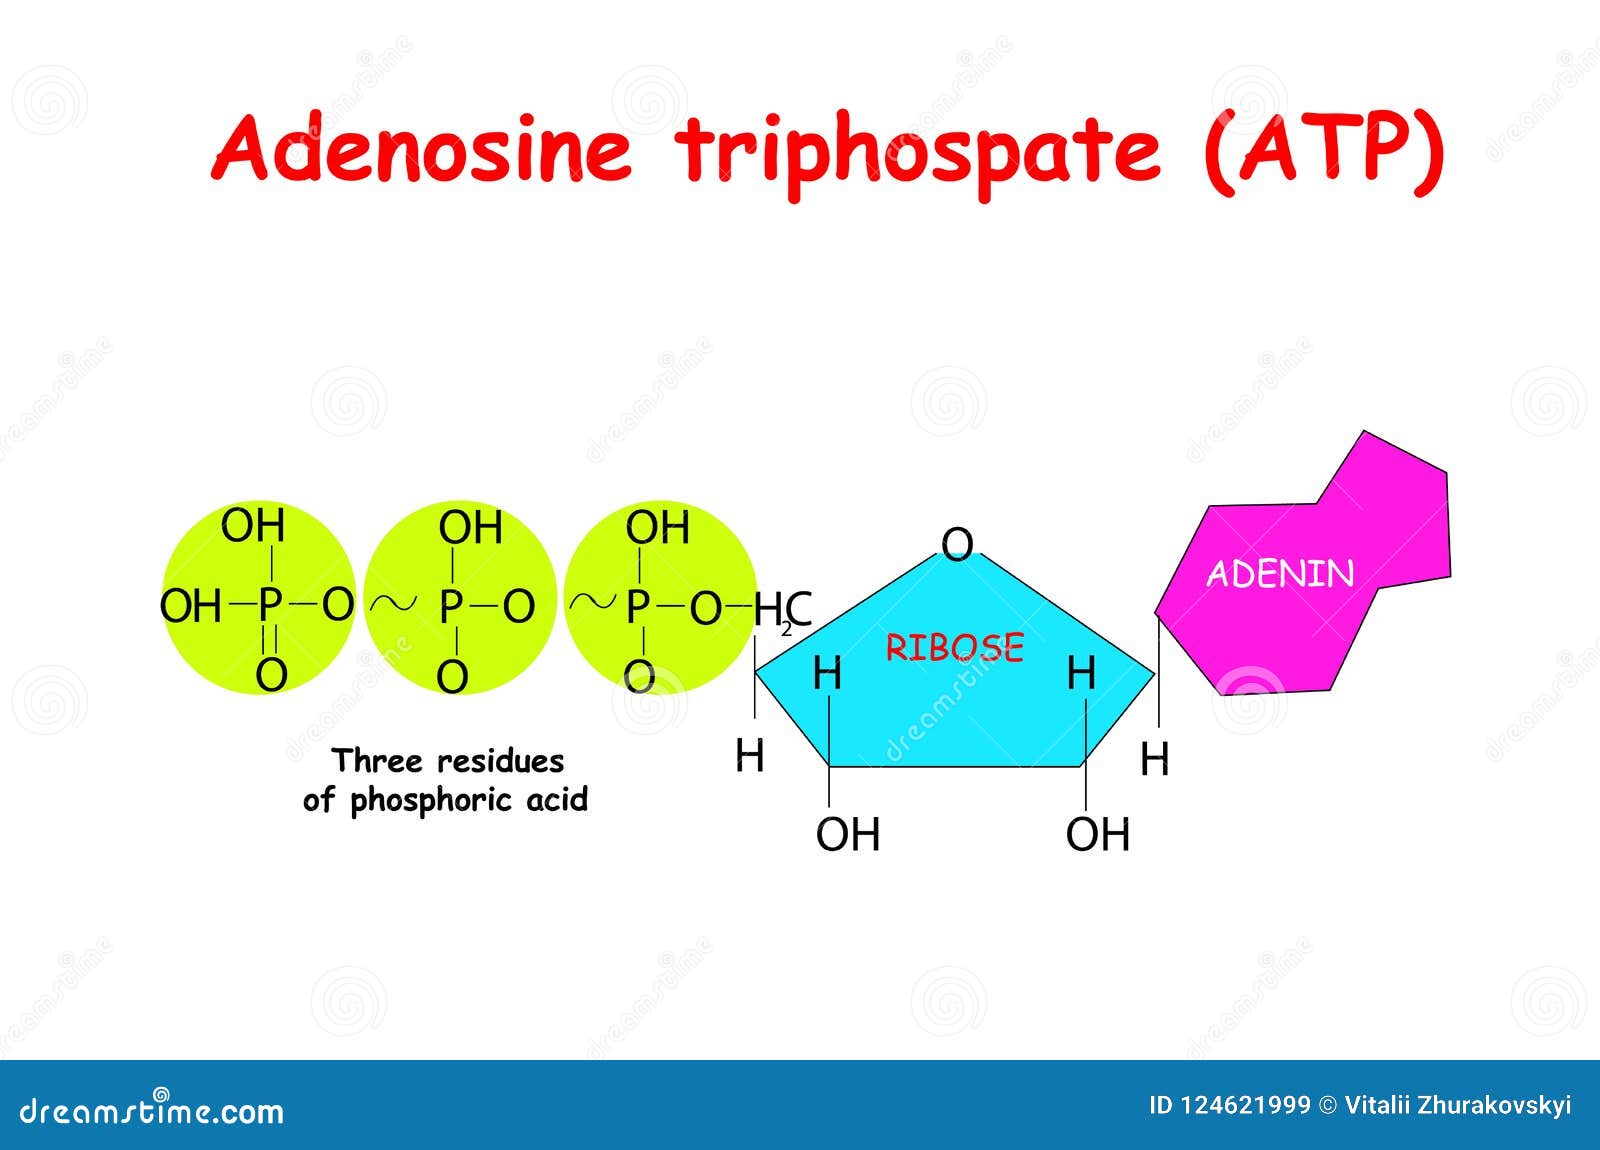 adenosine triphosphate atp on white background. atp provides energy to drive many processes in living cells, e.g. muscle contrac